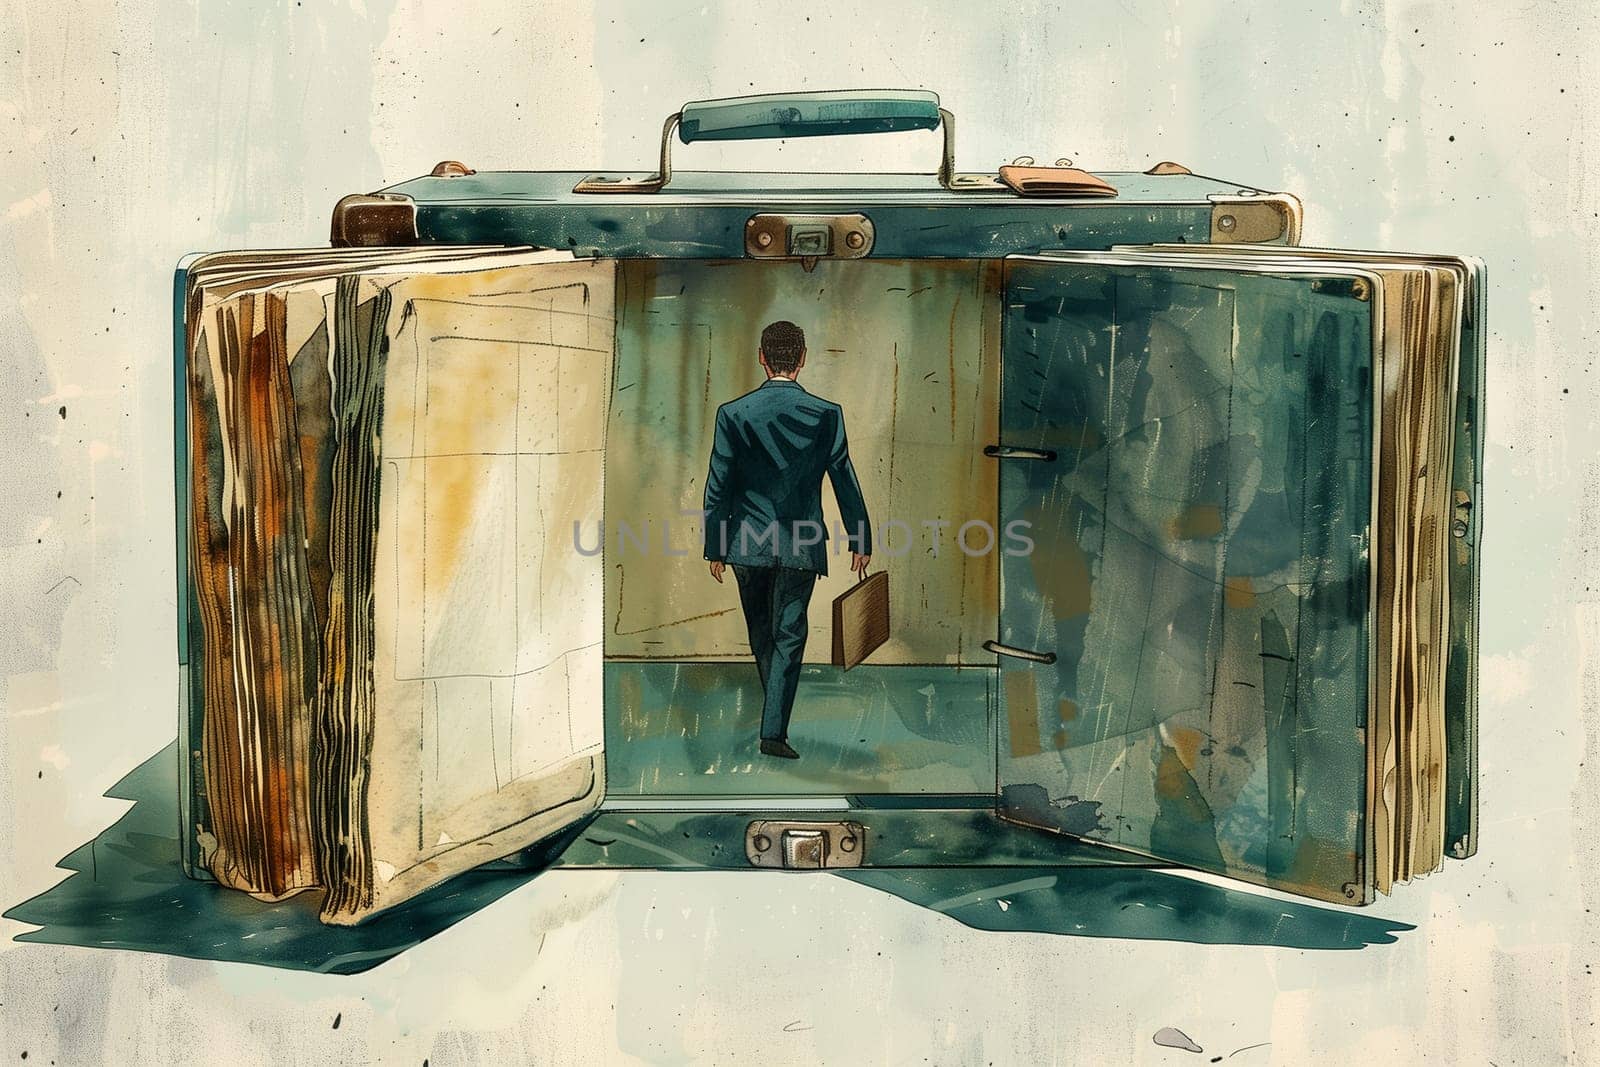 A painting depicting a man standing in an open suitcase, dressed in a suit. The man appears to be contemplating or preparing for travel.